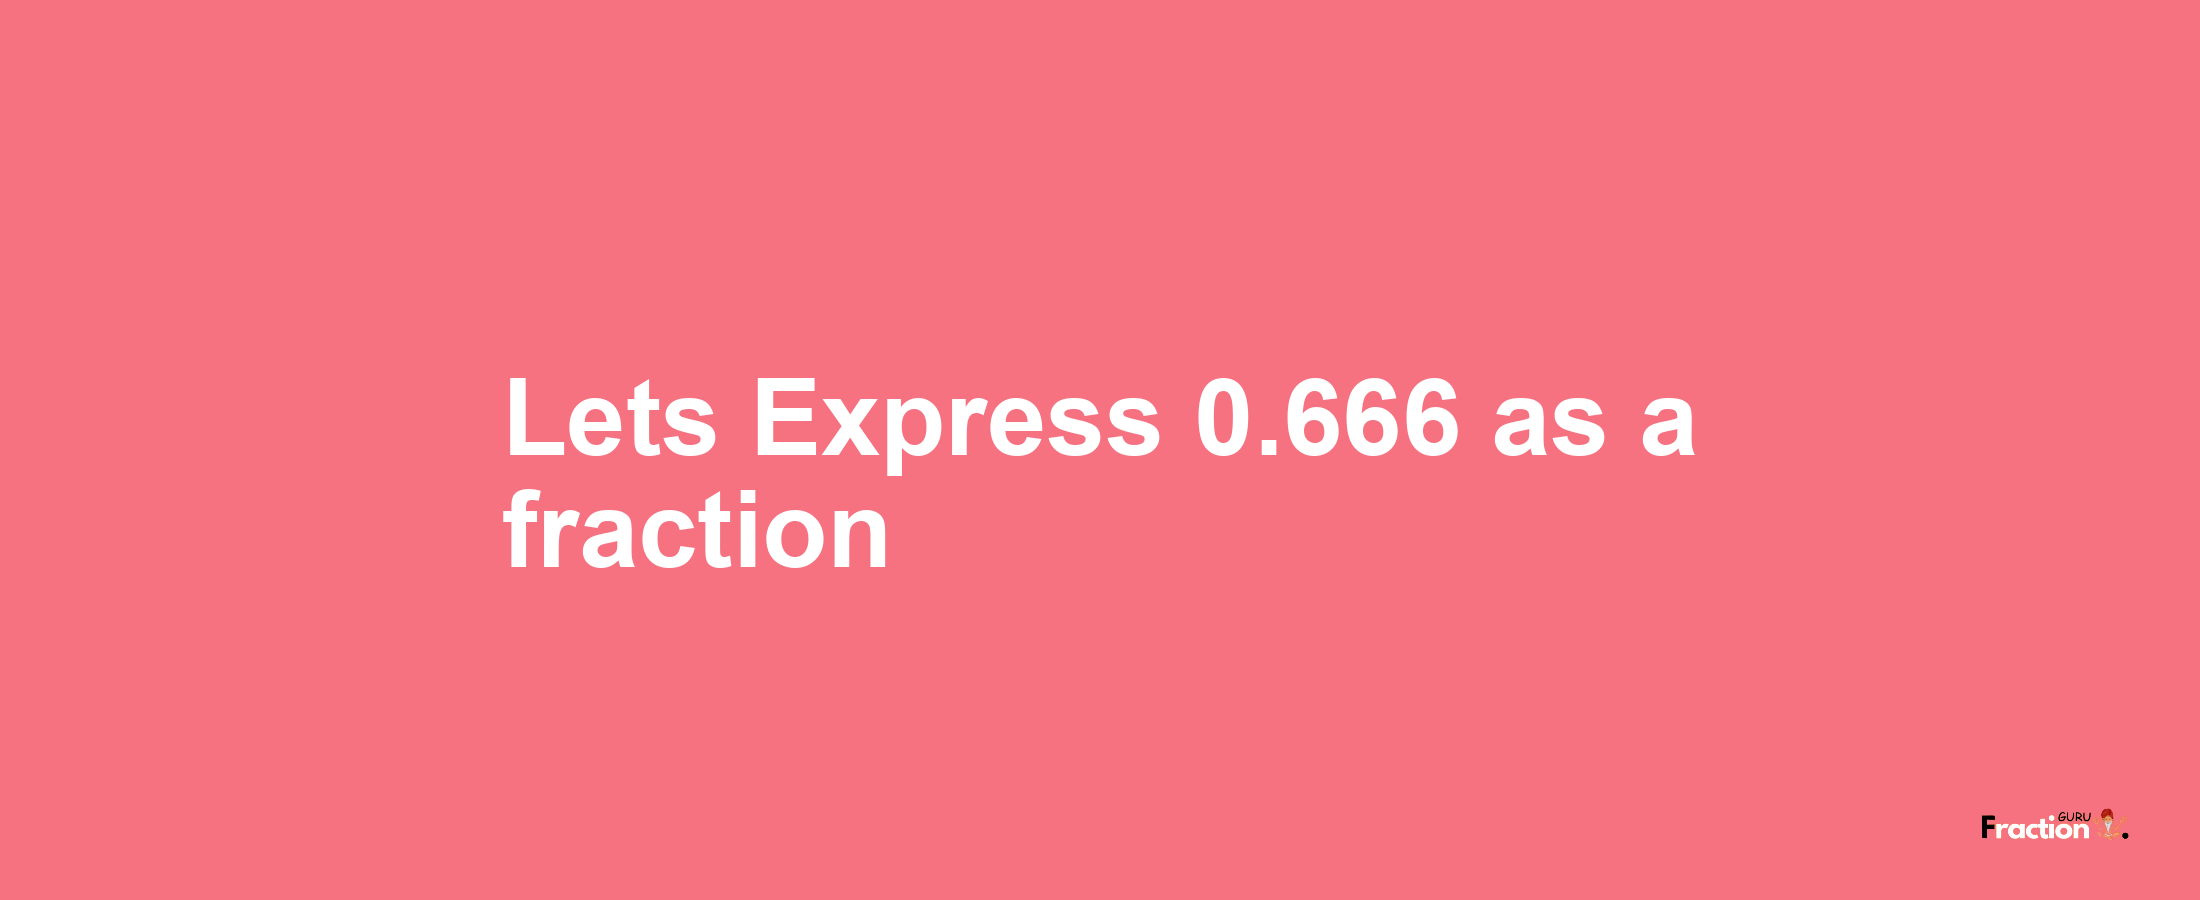 Lets Express 0.666 as afraction